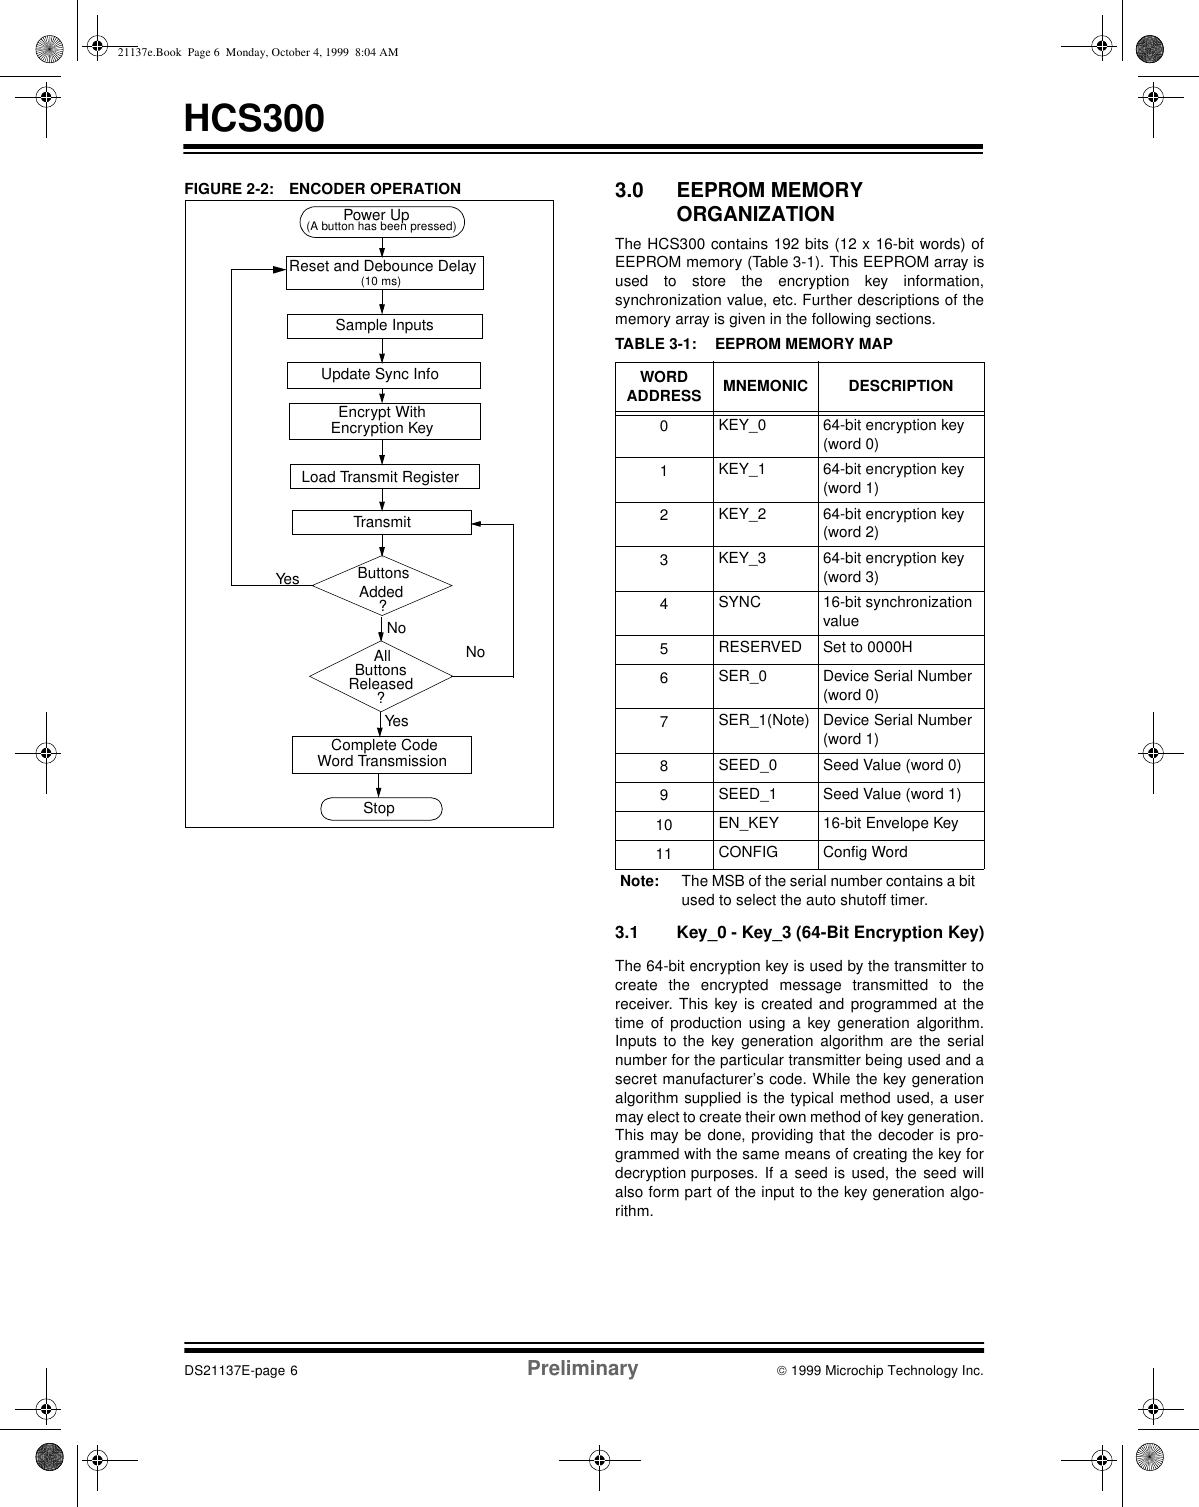 HCS300DS21137E-page 6 Preliminary  1999 Microchip Technology Inc.FIGURE 2-2: ENCODER OPERATION  3.0 EEPROM MEMORY ORGANIZATIONThe HCS300 contains 192 bits (12 x 16-bit words) ofEEPROM memory (Table 3-1). This EEPROM array isused to store the encryption key information,synchronization value, etc. Further descriptions of thememory array is given in the following sections.TABLE 3-1: EEPROM MEMORY MAP 3.1 Key_0 - Key_3 (64-Bit Encryption Key)The 64-bit encryption key is used by the transmitter tocreate the encrypted message transmitted to thereceiver. This key is created and programmed at thetime of production using a key generation algorithm.Inputs to the key generation algorithm are the serialnumber for the particular transmitter being used and asecret manufacturer’s code. While the key generationalgorithm supplied is the typical method used, a usermay elect to create their own method of key generation.This may be done, providing that the decoder is pro-grammed with the same means of creating the key fordecryption purposes. If a seed is used, the seed willalso form part of the input to the key generation algo-rithm.Power UpReset and Debounce Delay      (10 ms)Sample InputsUpdate Sync Info Encrypt WithLoad Transmit Register ButtonsAdded?AllButtonsReleased?(A button has been pressed)  Transmit StopNoYesNoYesEncryption Key Complete Code Word Transmission WORD ADDRESS MNEMONIC DESCRIPTION0KEY_0  64-bit encryption key(word 0)1KEY_1 64-bit encryption key(word 1)2KEY_2 64-bit encryption key(word 2)3KEY_3  64-bit encryption key(word 3)4SYNC 16-bit synchronizationvalue 5RESERVED Set to 0000H6SER_0 Device Serial Number(word 0)7SER_1(Note) Device Serial Number(word 1)8SEED_0 Seed Value (word 0)9SEED_1 Seed Value (word 1)10 EN_KEY 16-bit Envelope Key11 CONFIG Config WordNote: The MSB of the serial number contains a bit used to select the auto shutoff timer.21137e.Book  Page 6  Monday, October 4, 1999  8:04 AM